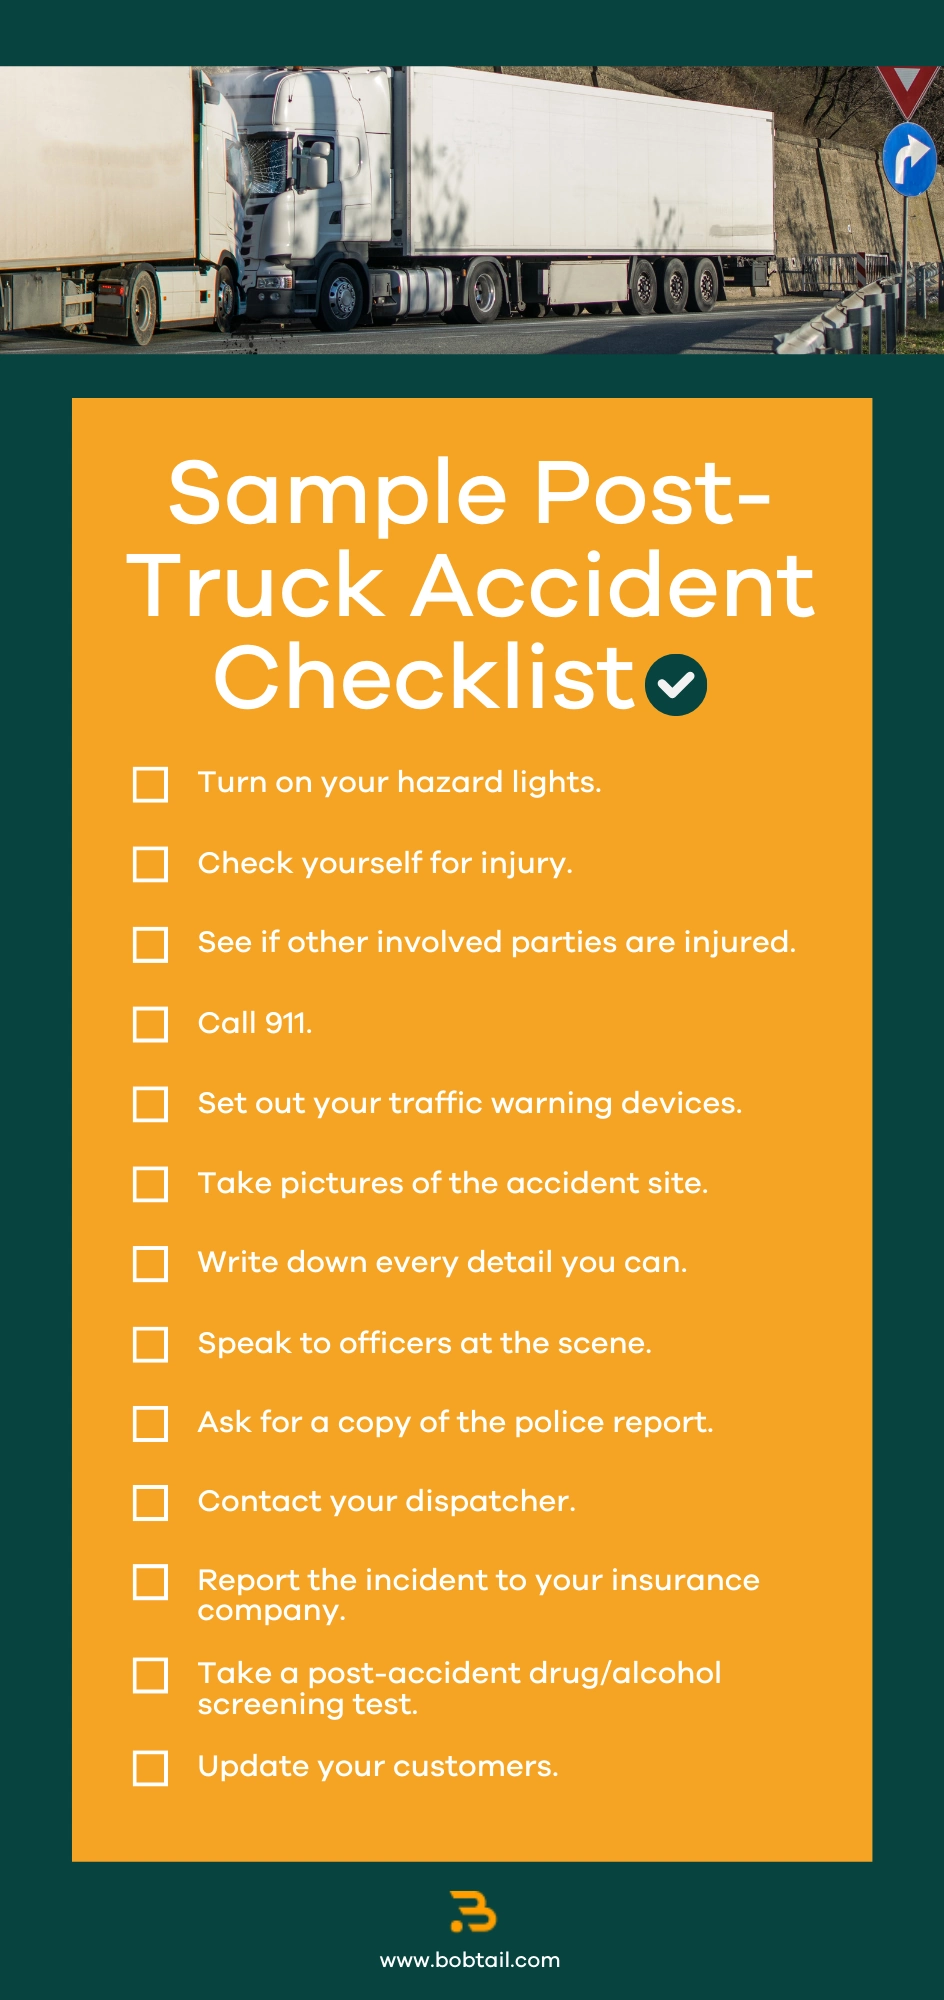 A Sample Post-Truck Accident Checklist